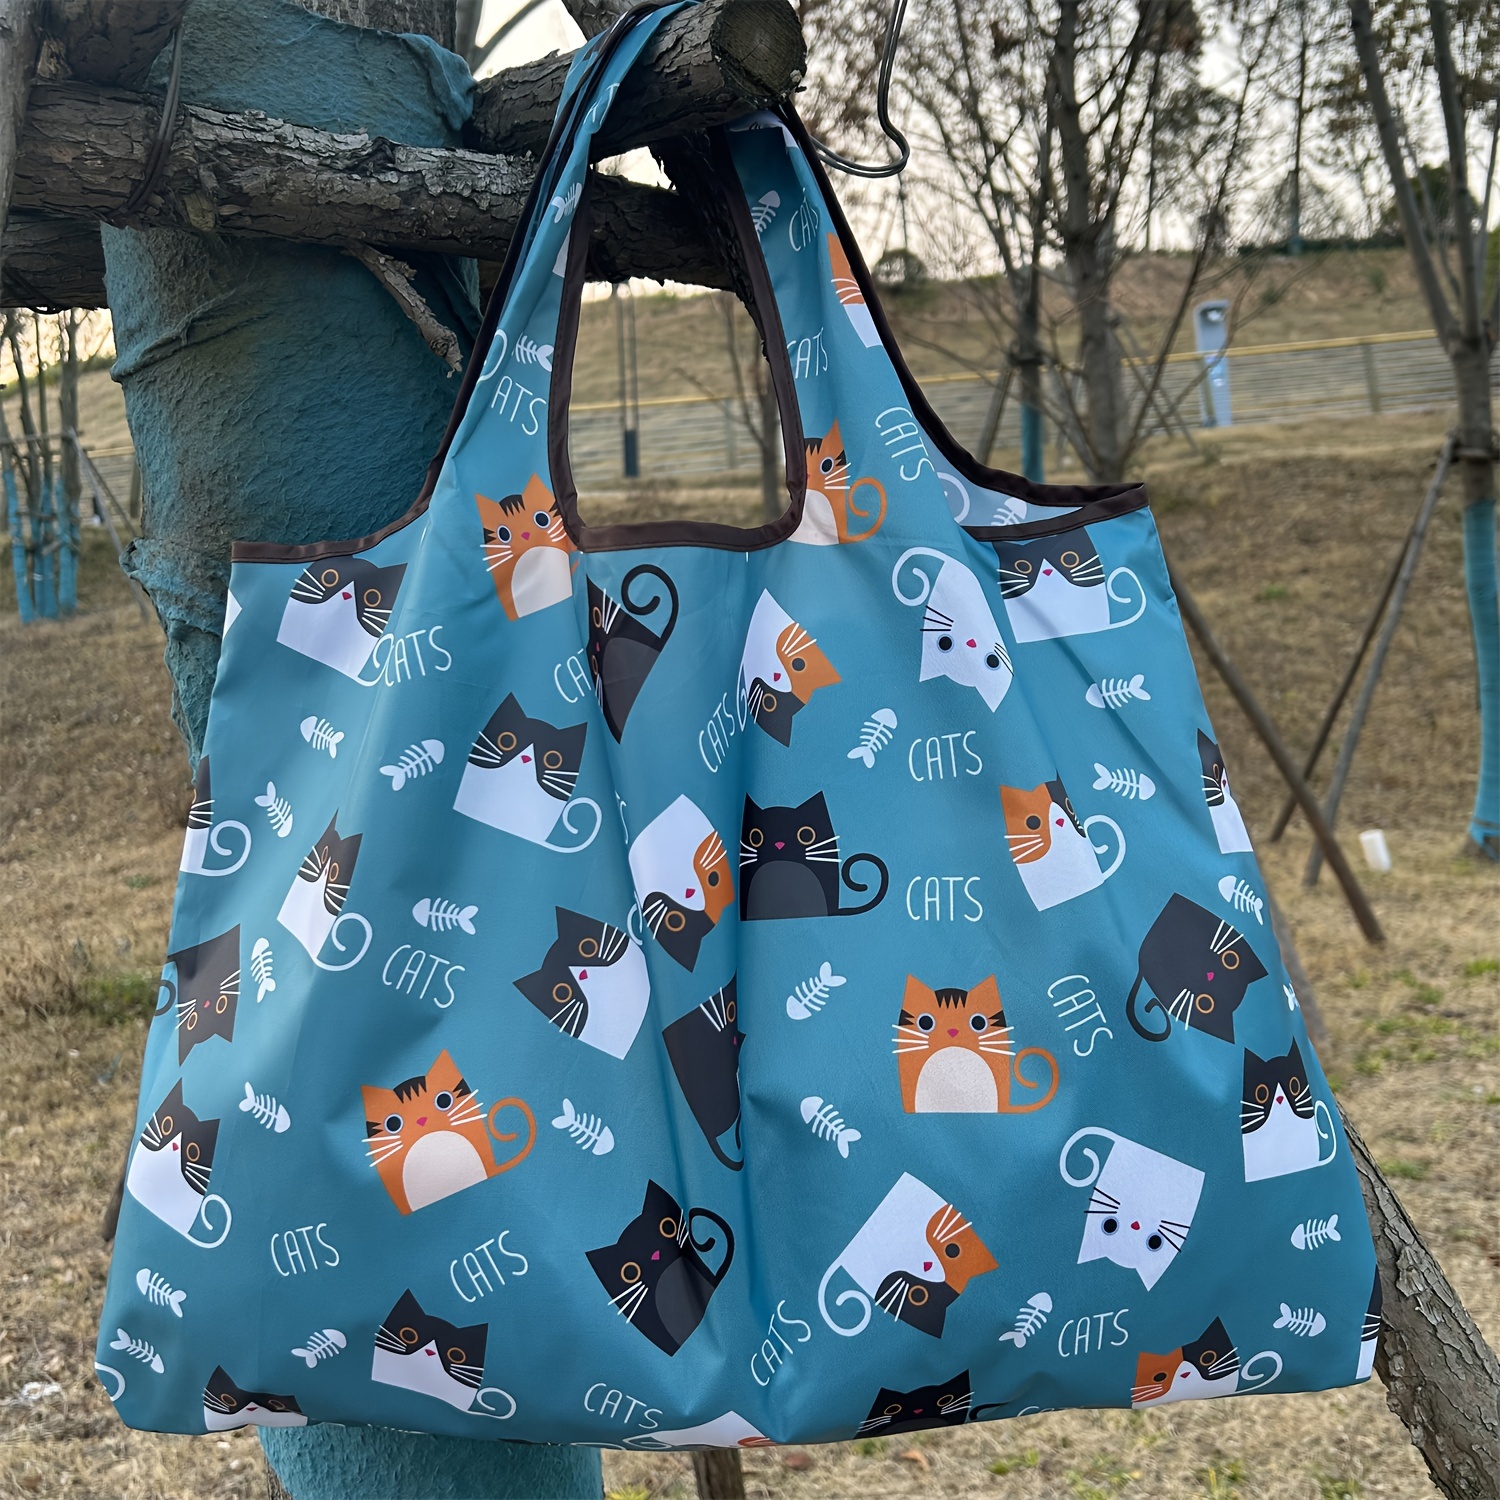 

Cartoon Cats And Fishes Print Large Capacity Portable Shopping Bag, Reusable Lightweight Soft Tote Bag, Foldable Portable Shoulder Handbag, Casual Daypack For Going Out